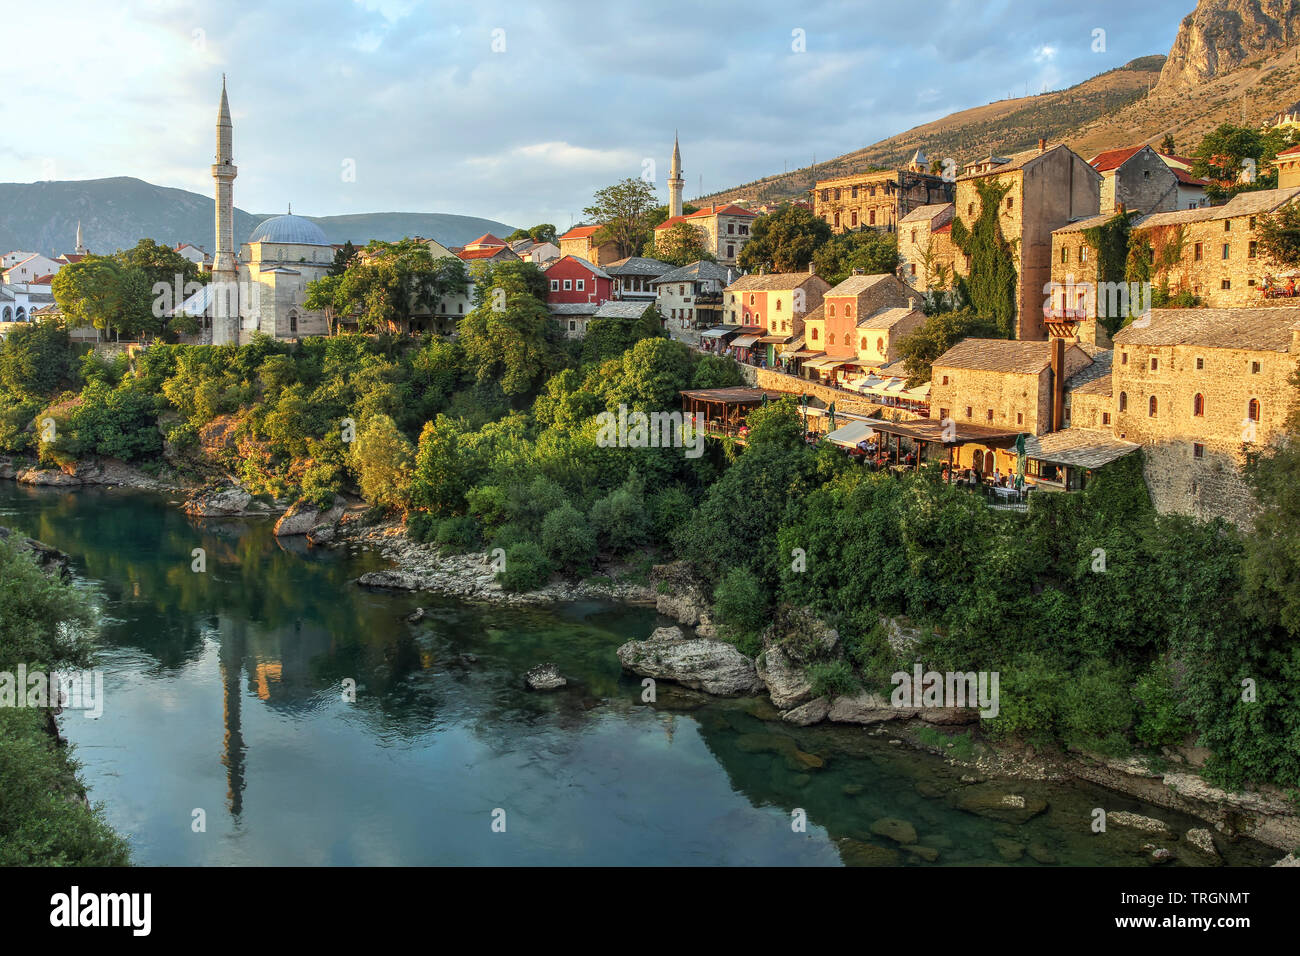 Golden hour over the Neretva river banks of the city of Mostar in Bosnia and Herzegovina seen from the famous bridge. Stock Photo